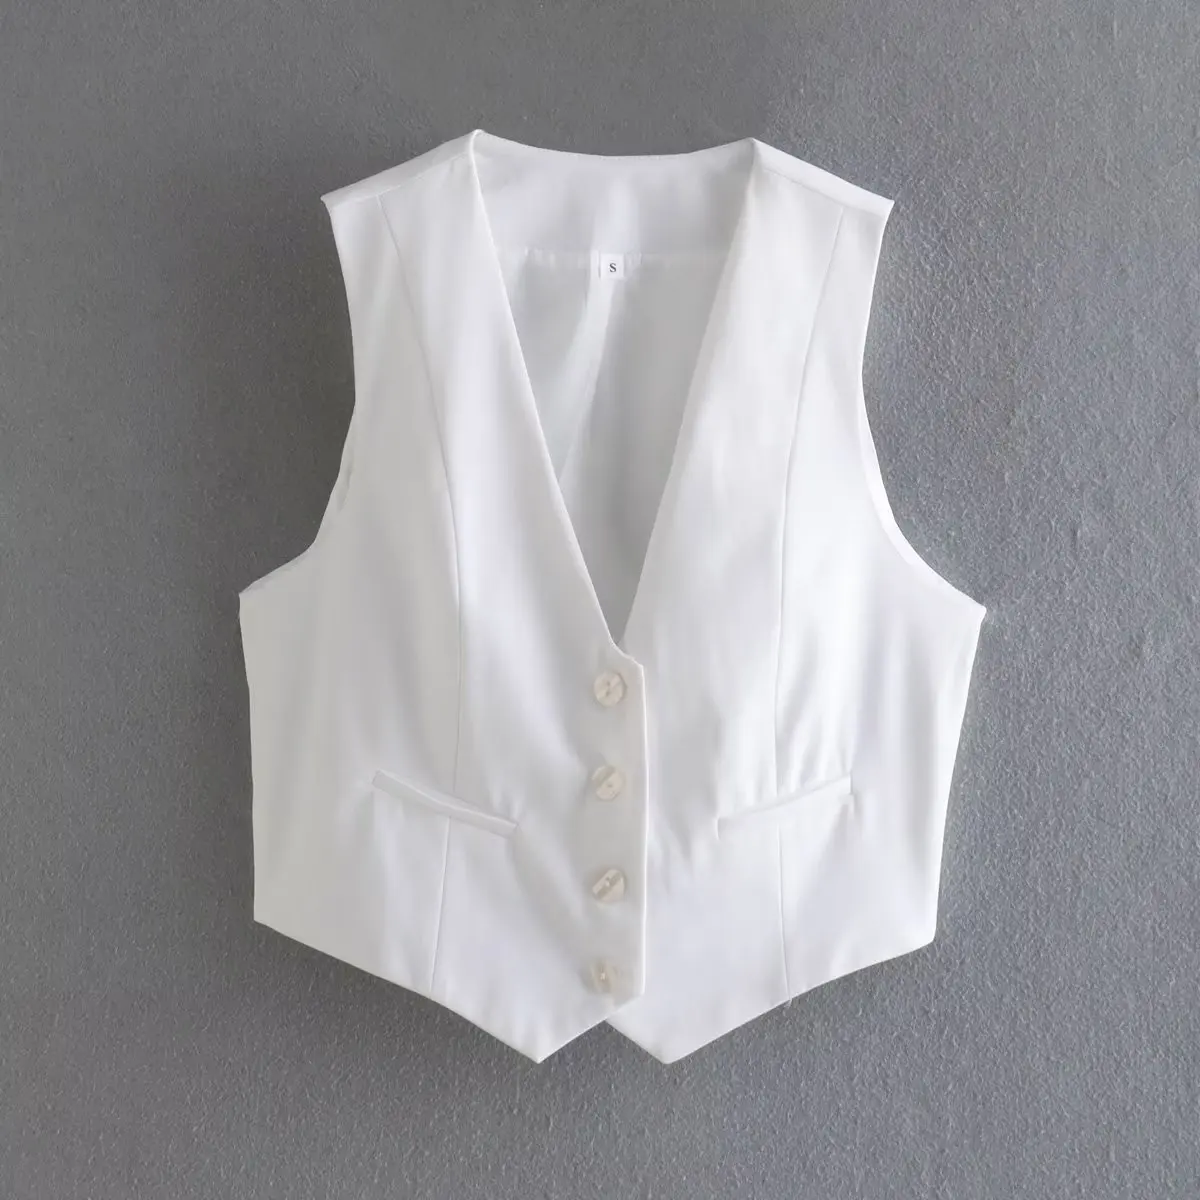 Womens Plain Sleeveless Collared Waistcoat Ladies Casual Hotels Party Wear Vest 